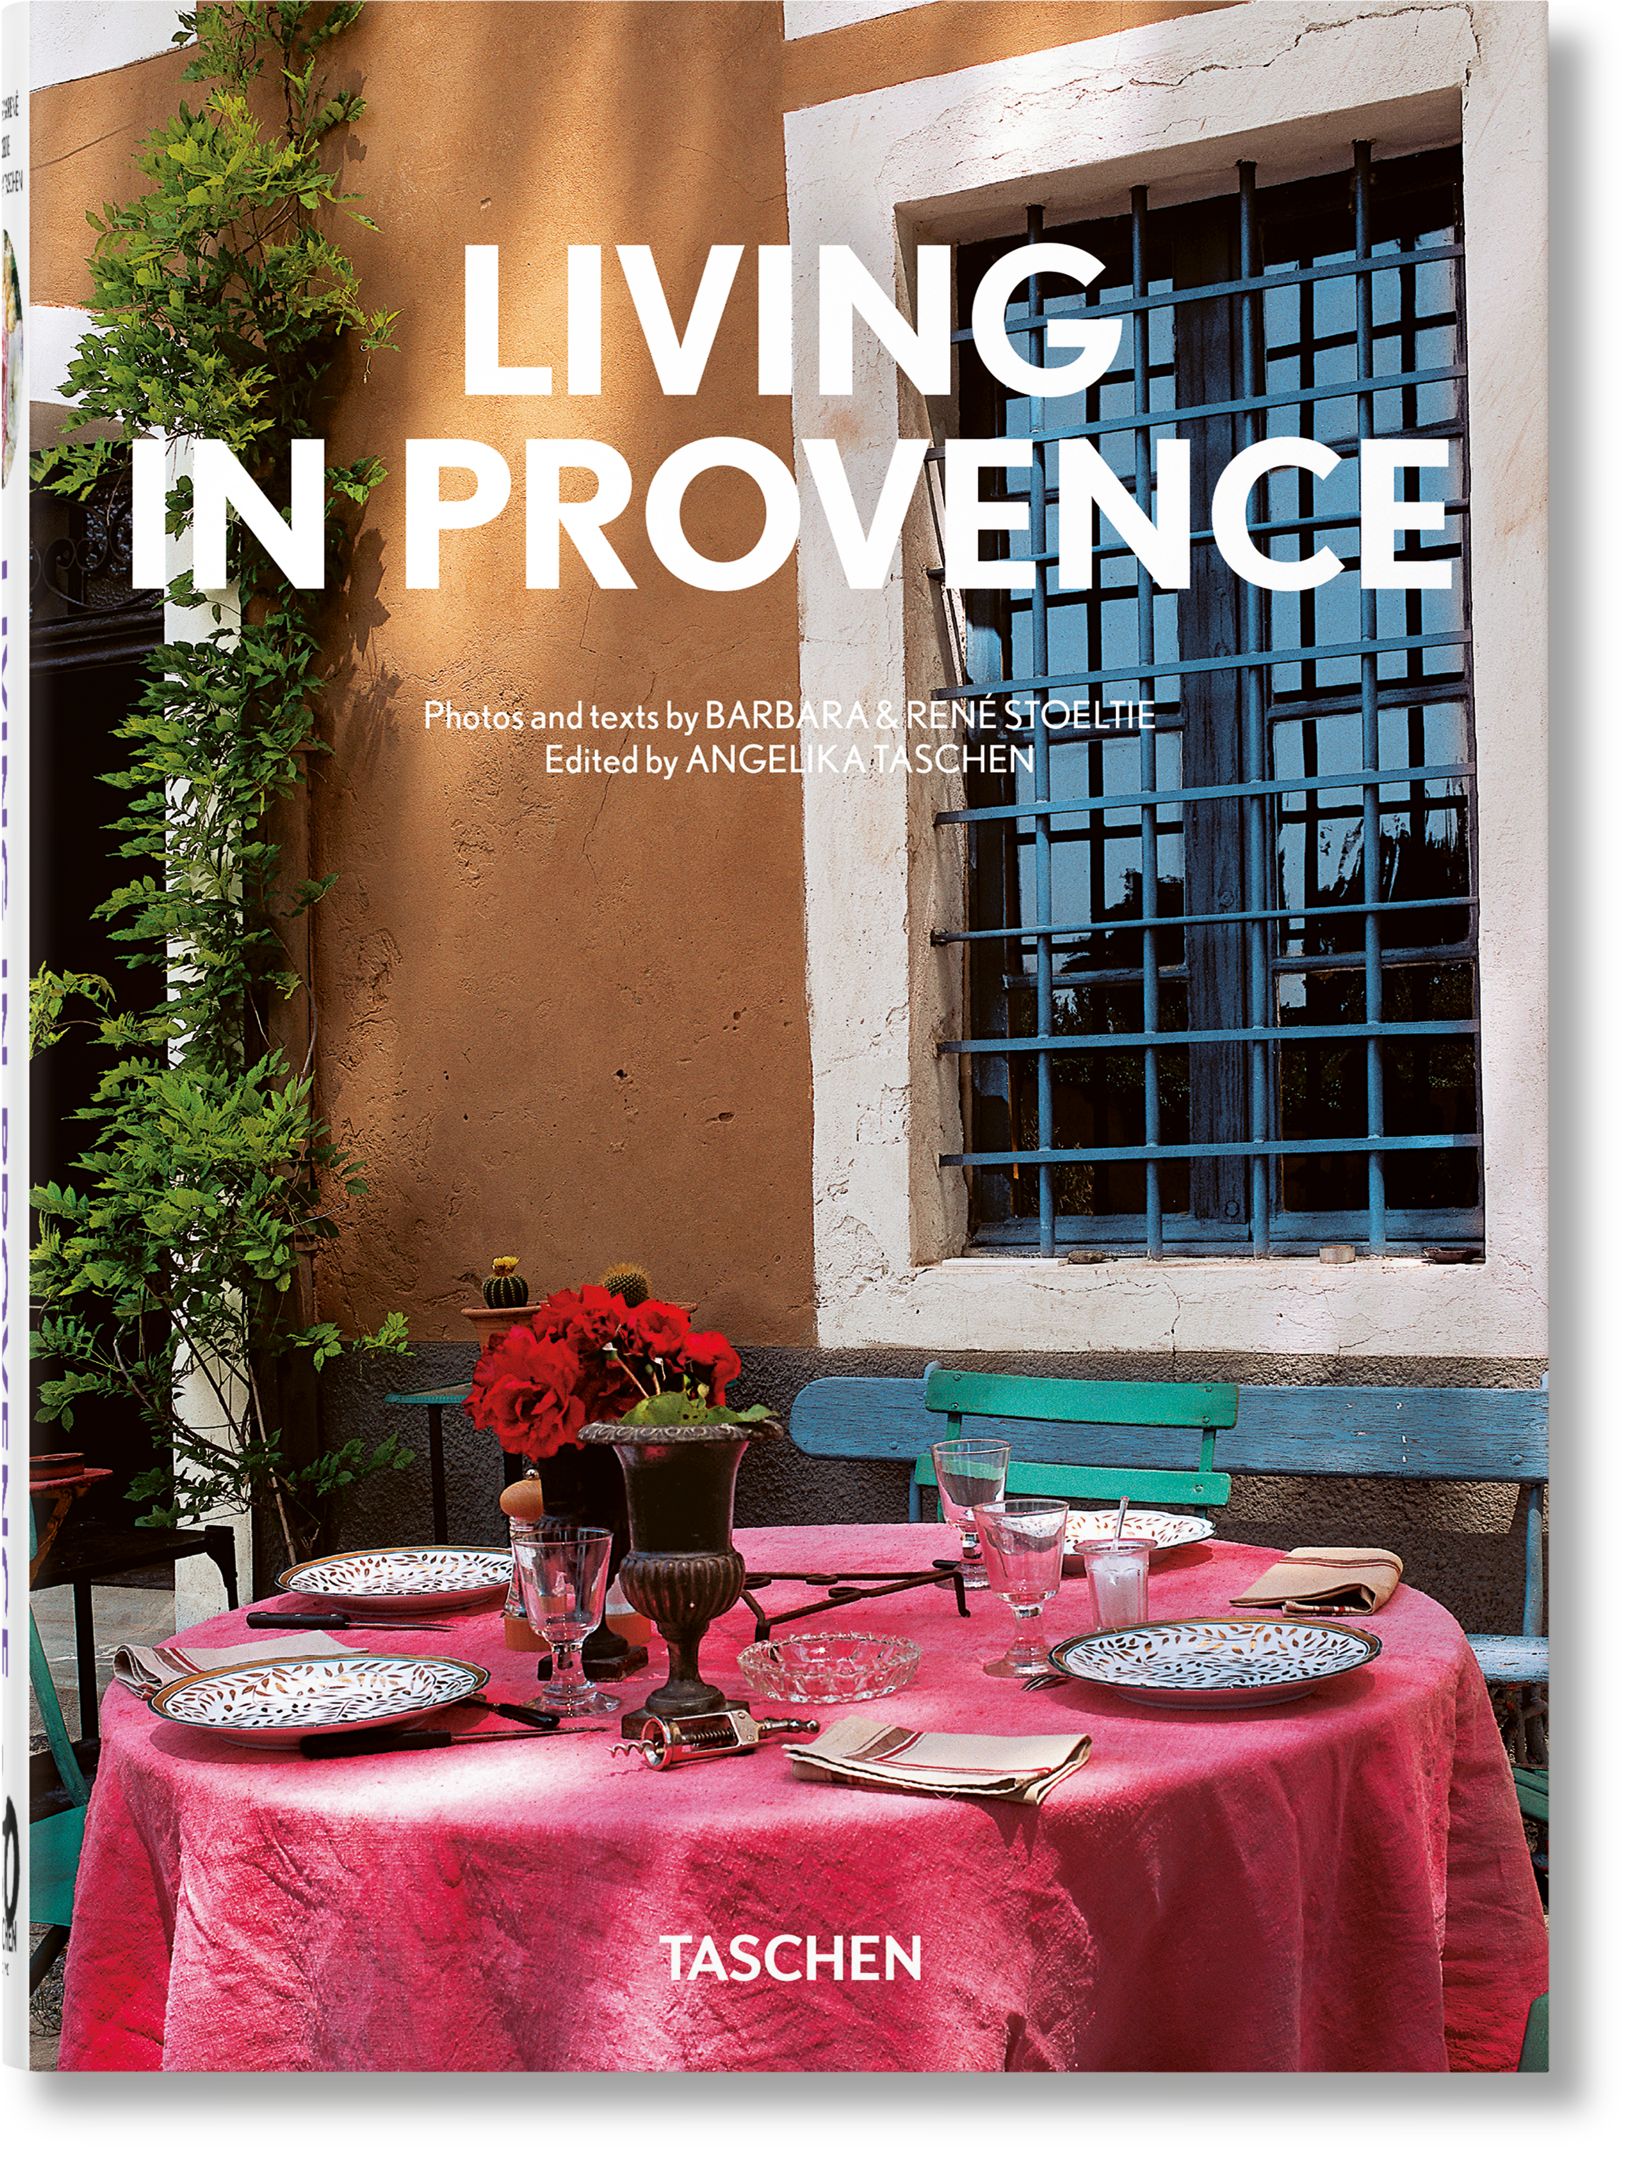 Éditions TASCHEN: Living in Provence. 40th Ed. | TASCHEN